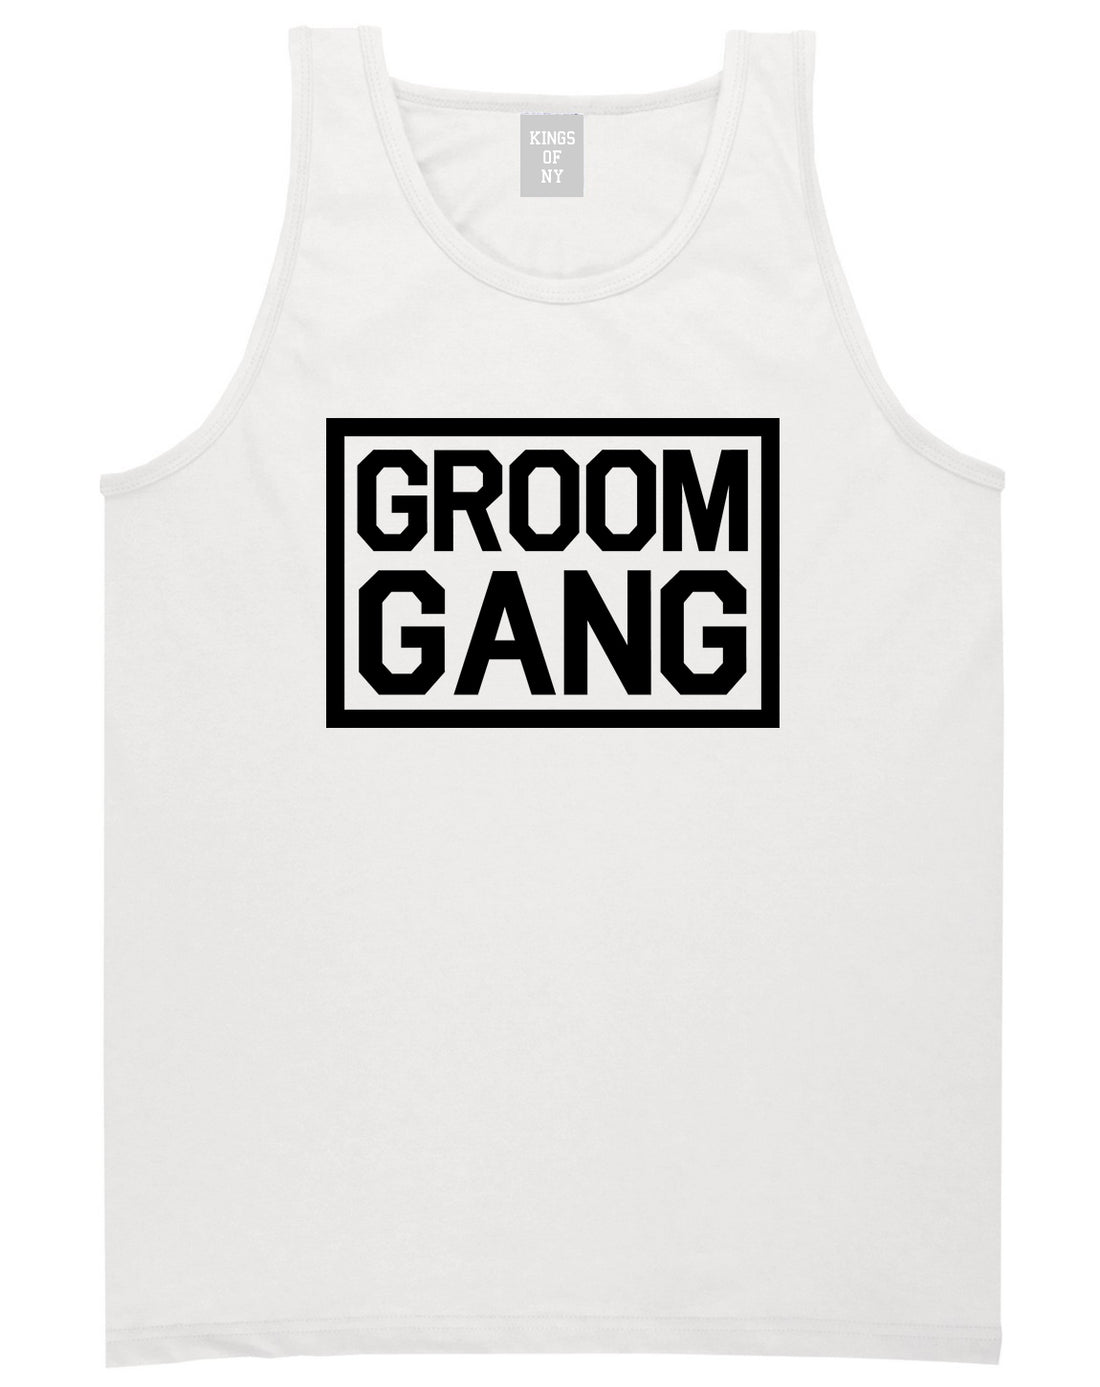 Groom Gang Bachelor Party White Tank Top Shirt by Kings Of NY